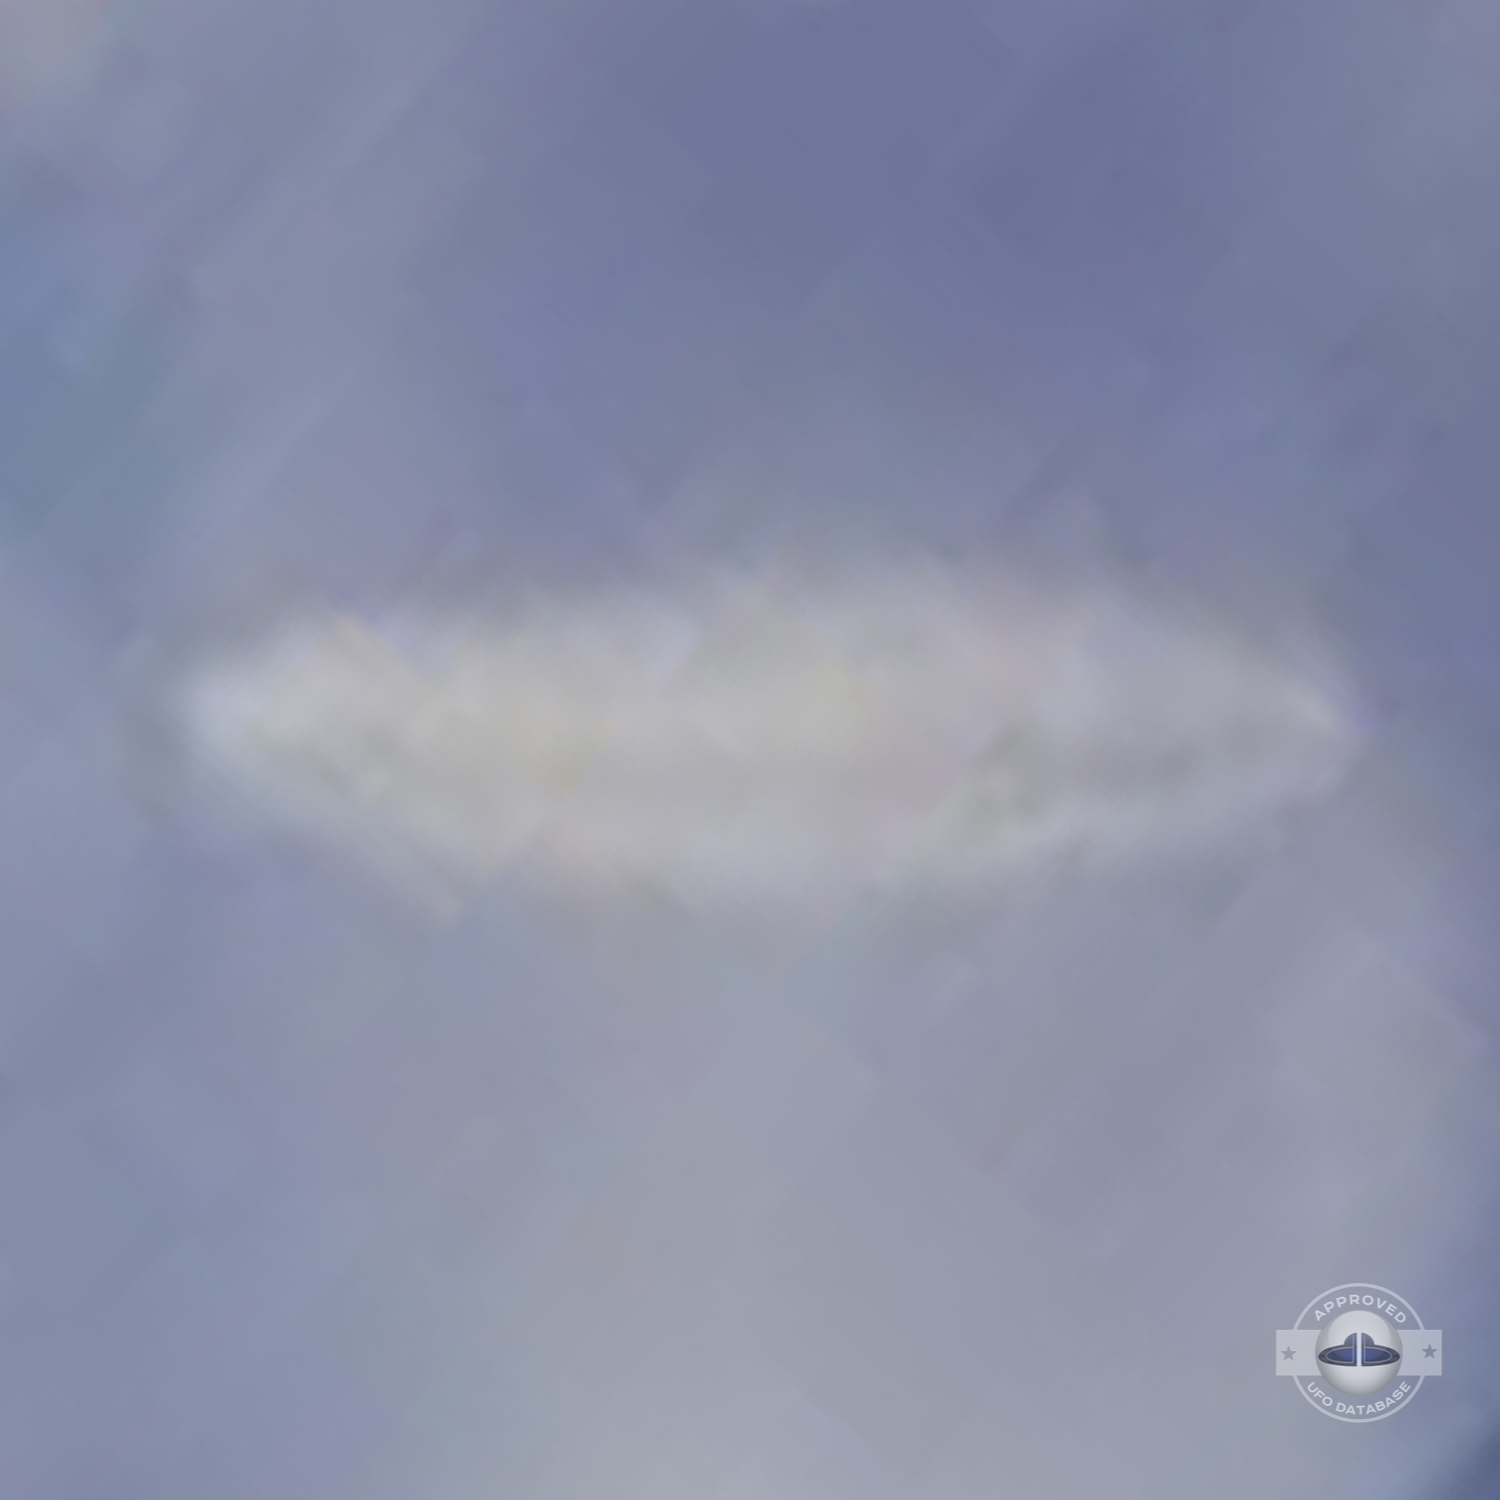 UFO almost sideways over buildings leaving a white gaseous trail 1957 UFO Picture #124-5